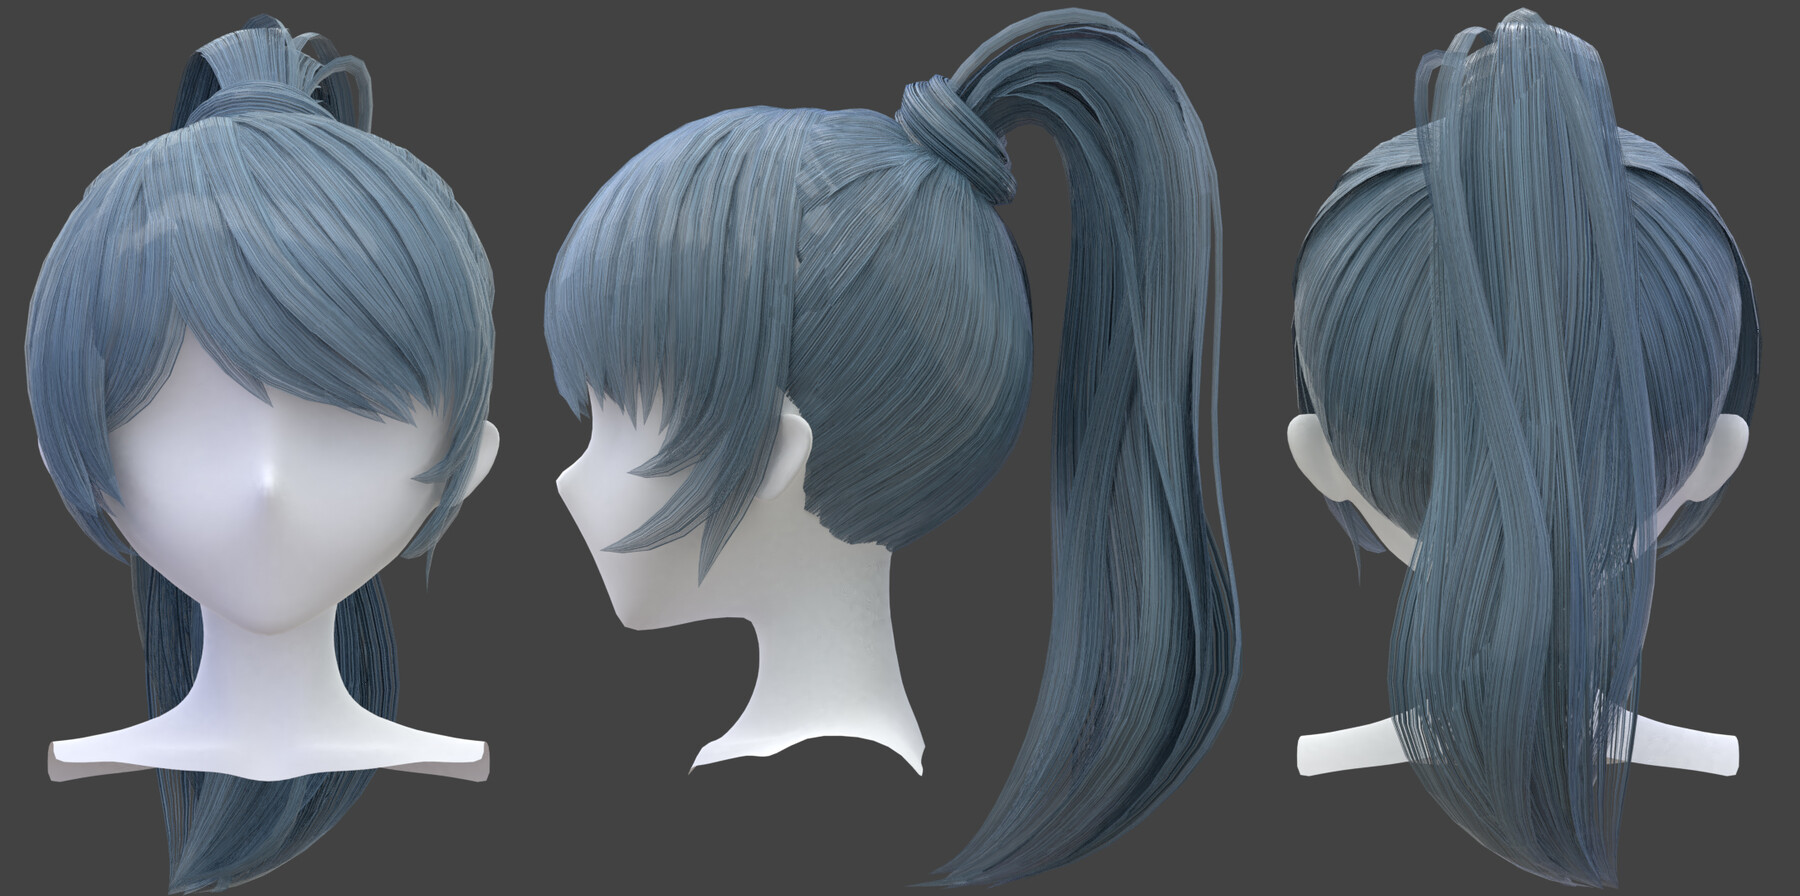 ArtStation - Anime hairstyles for girls: how does the hair we choose affect  our character's image?